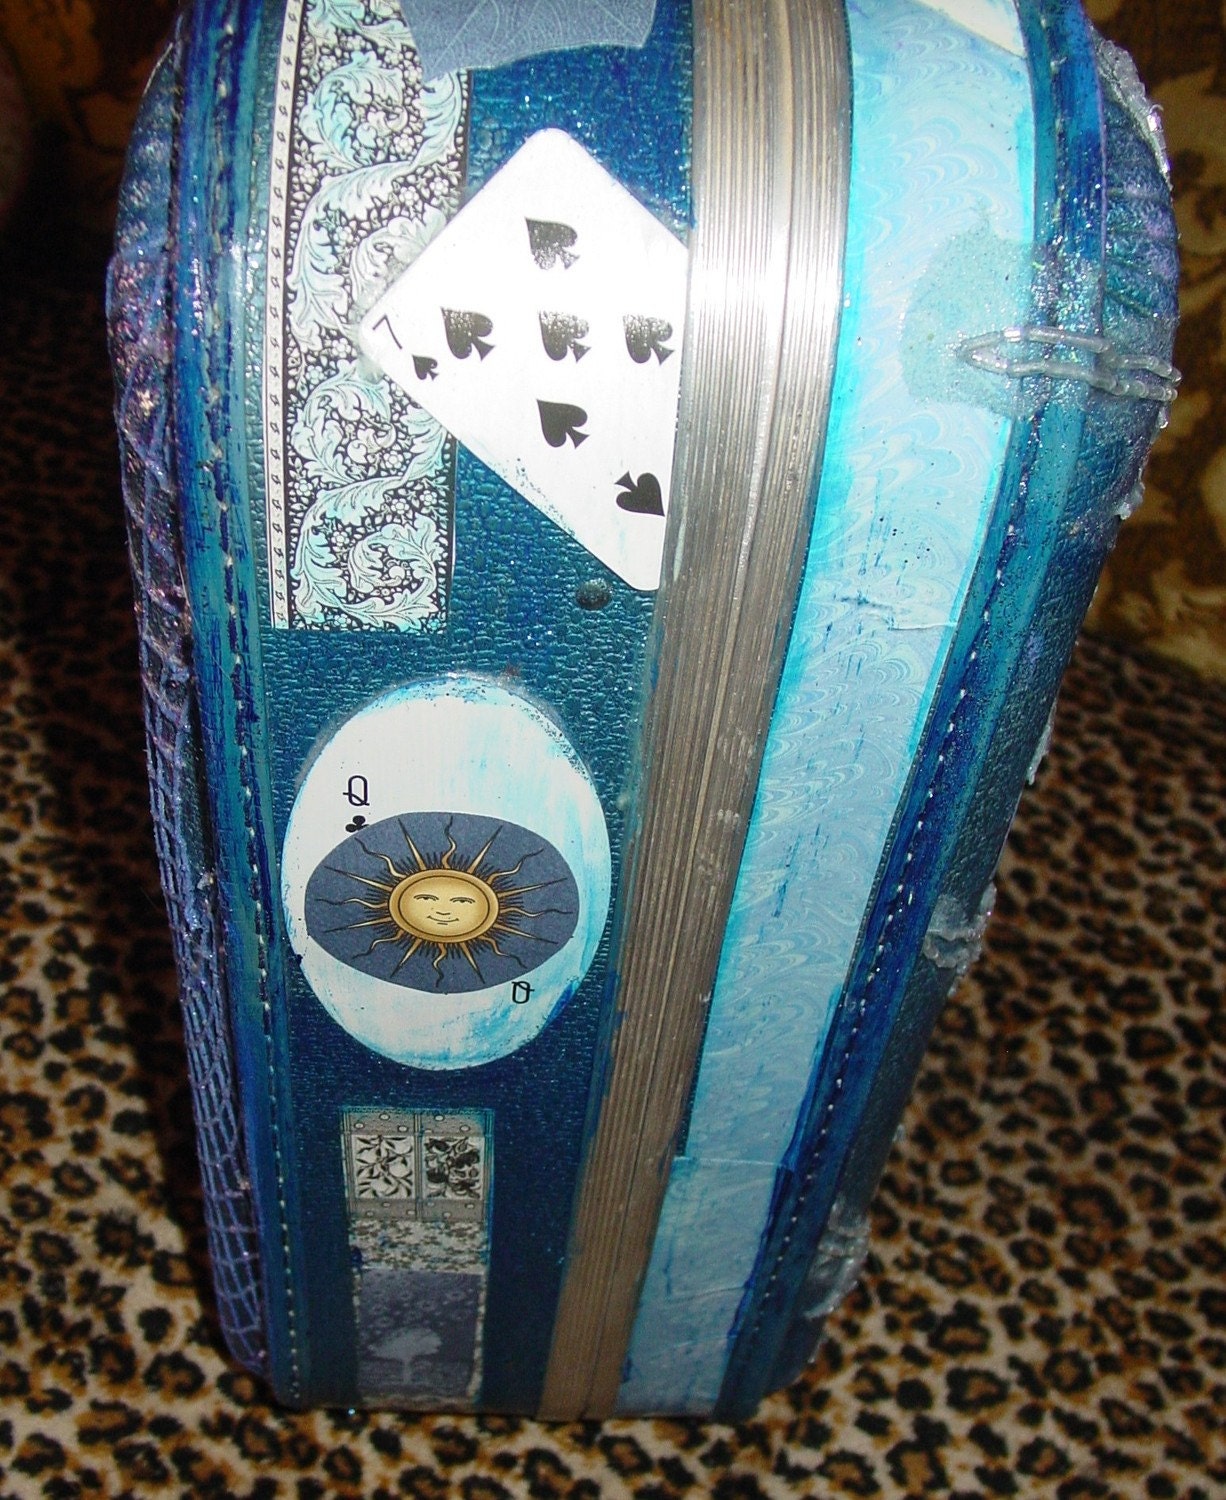 DREAMY Magical recycled vintage suitcase for TAROT CARDS